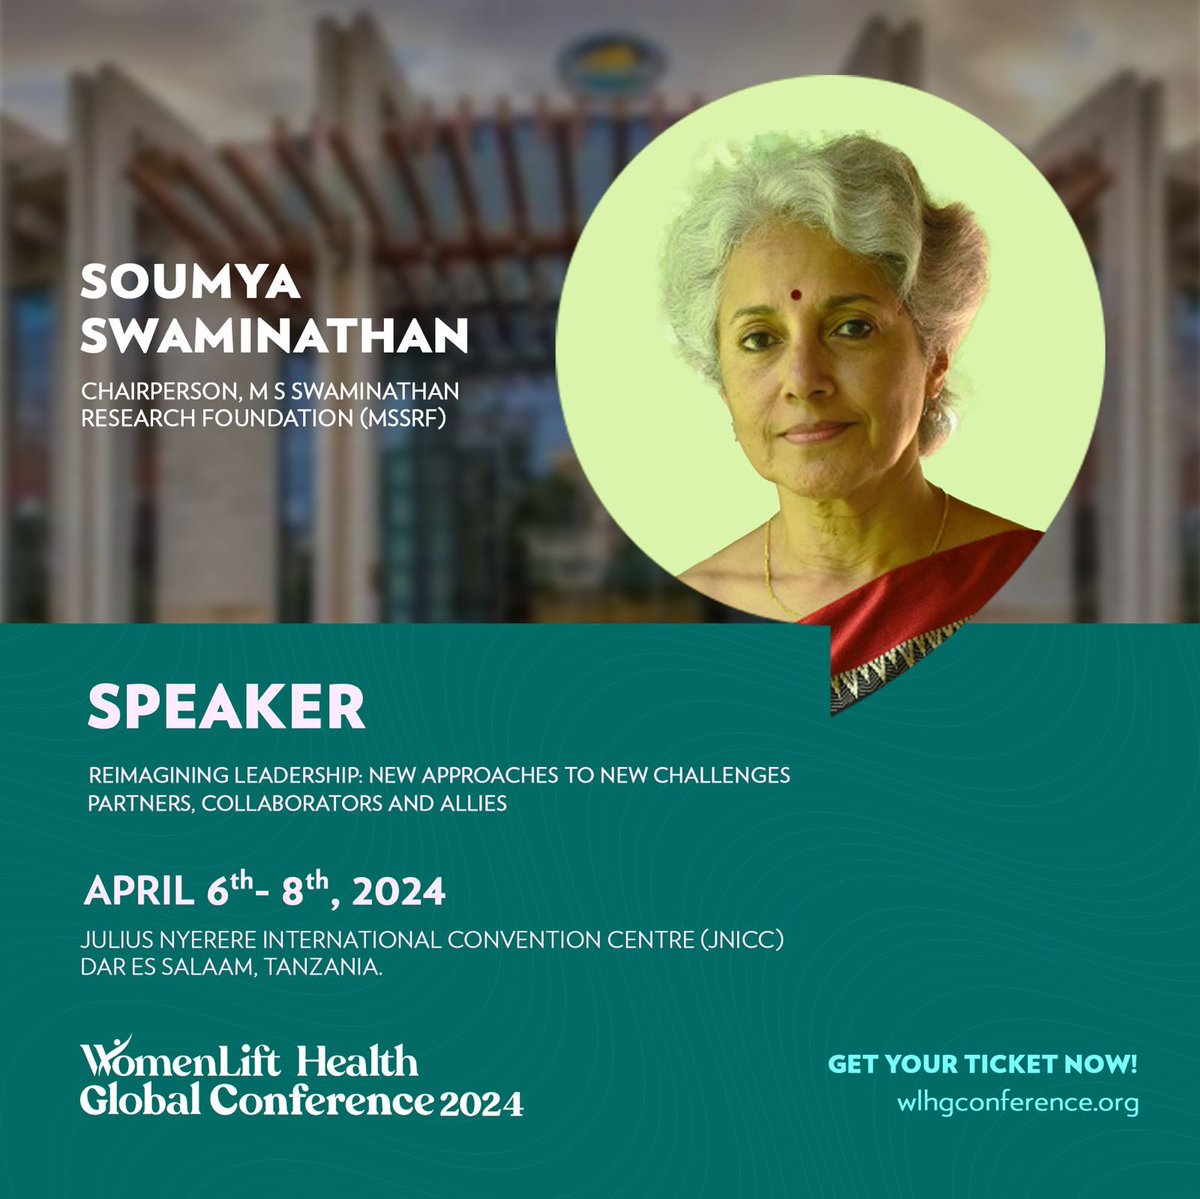 #MeetTheSpeaker Excited to welcome @mssrf Chairperson, @doctorsoumya, to our enlightening discussion on the intersection of climate, health, and gender through the lens of women’s leadership at #WLHGC2024. Dr. Swaminathan will shed light on the pivotal role of women,